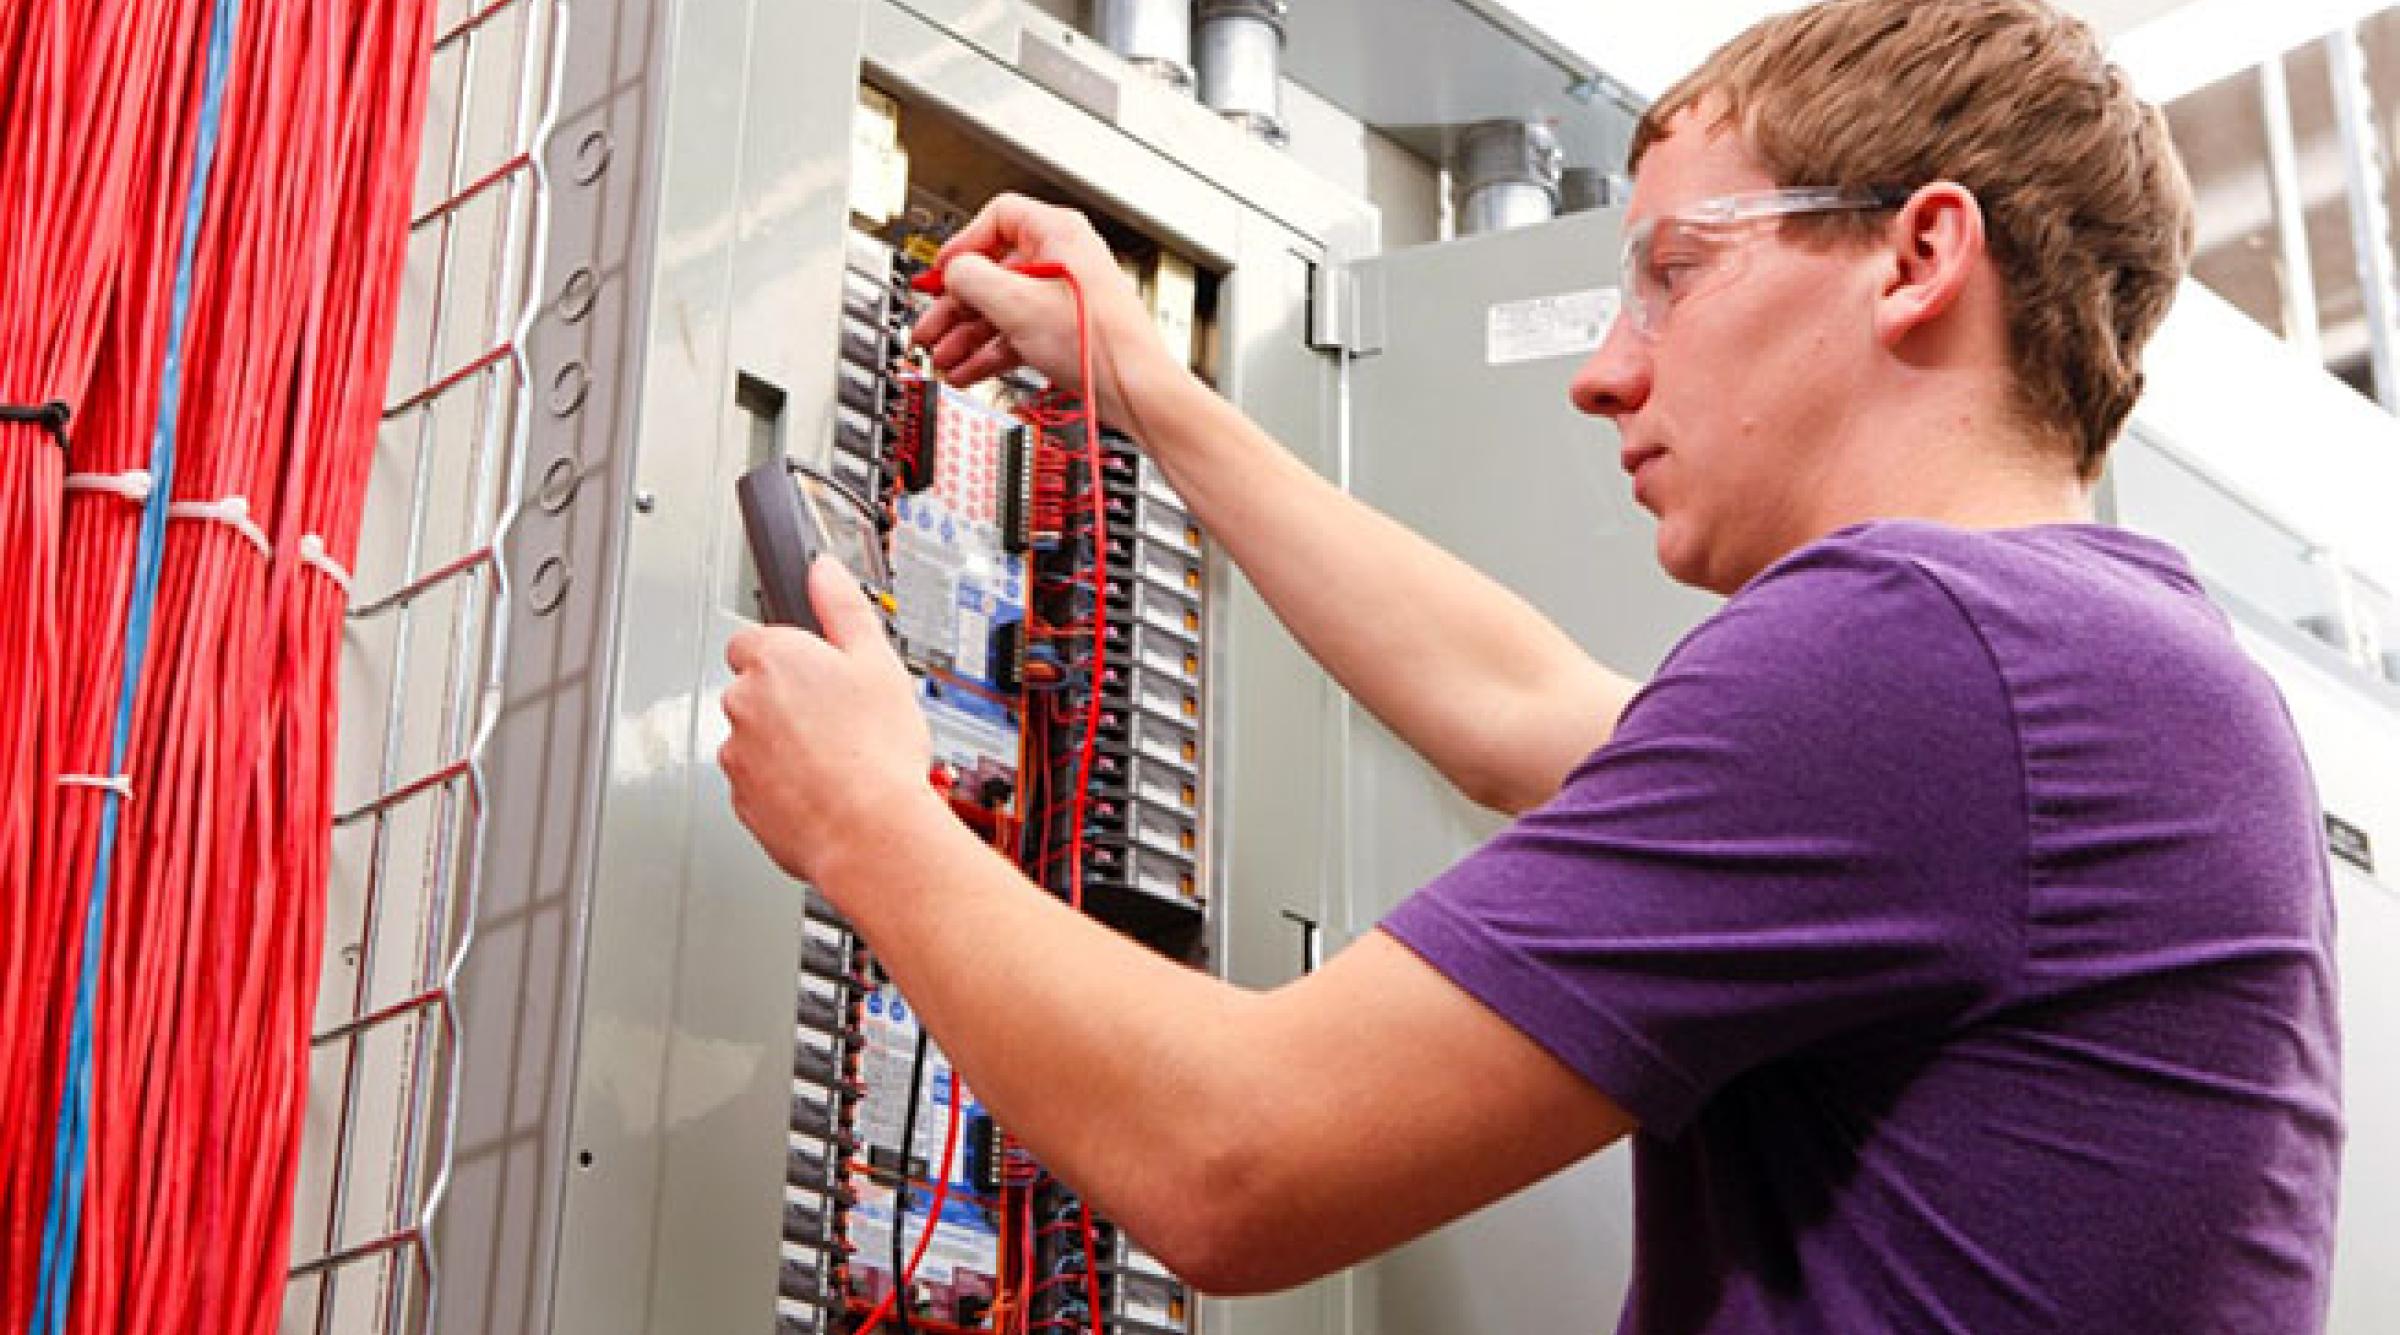 Electrical Apprenticeship student